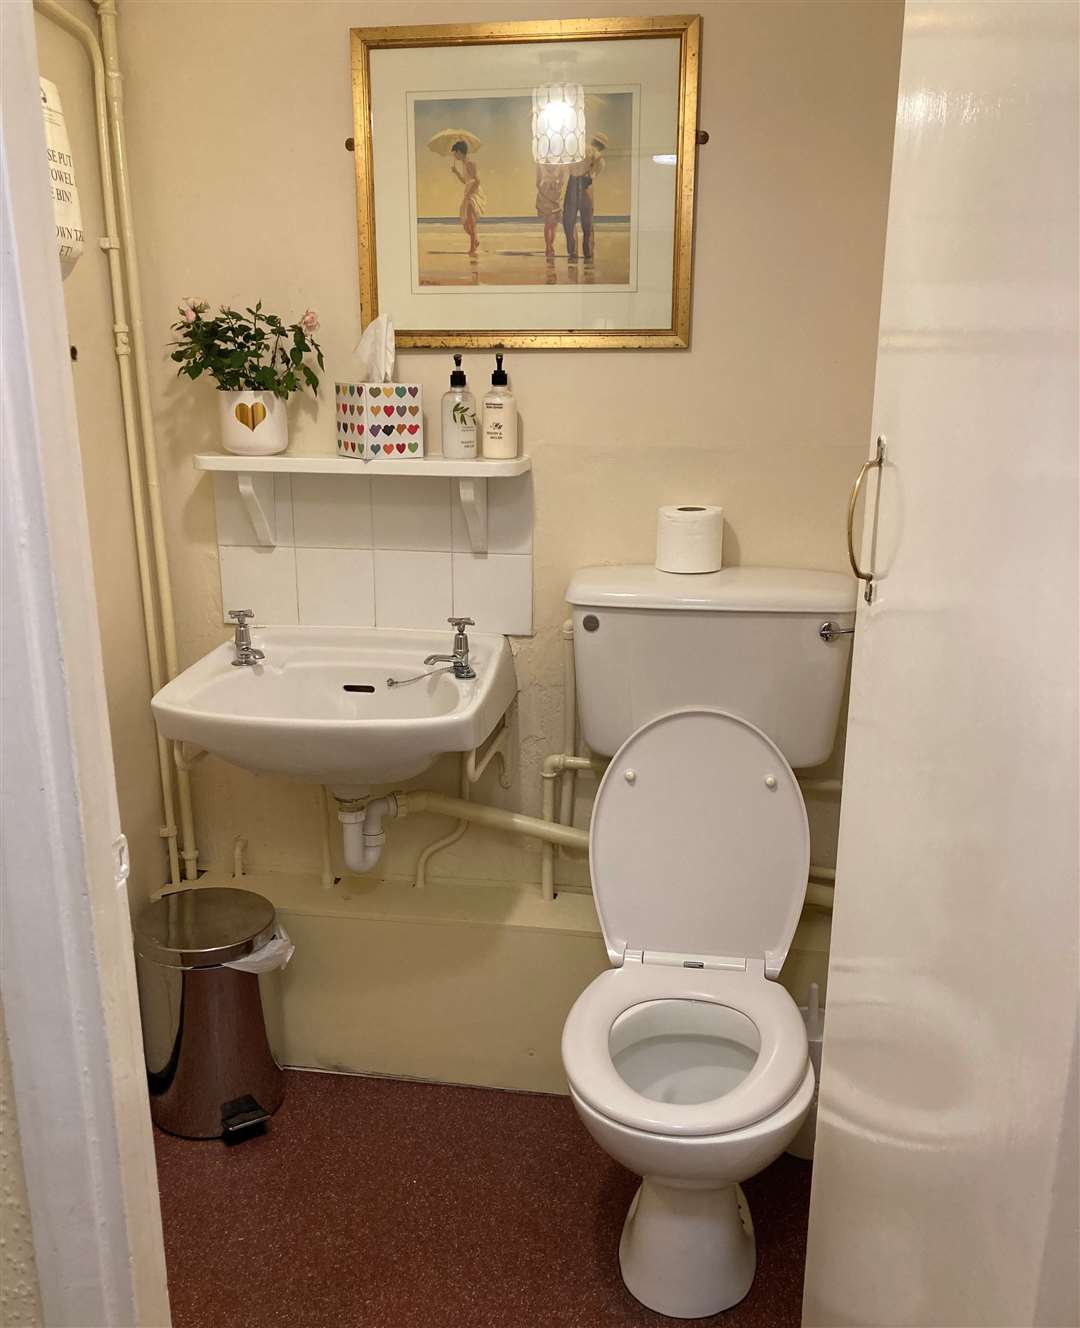 Mrs SD’s shot of the ladies loo perfectly demonstrates the contrast with the gents – no artwork, pot plants or moisturiser for the men